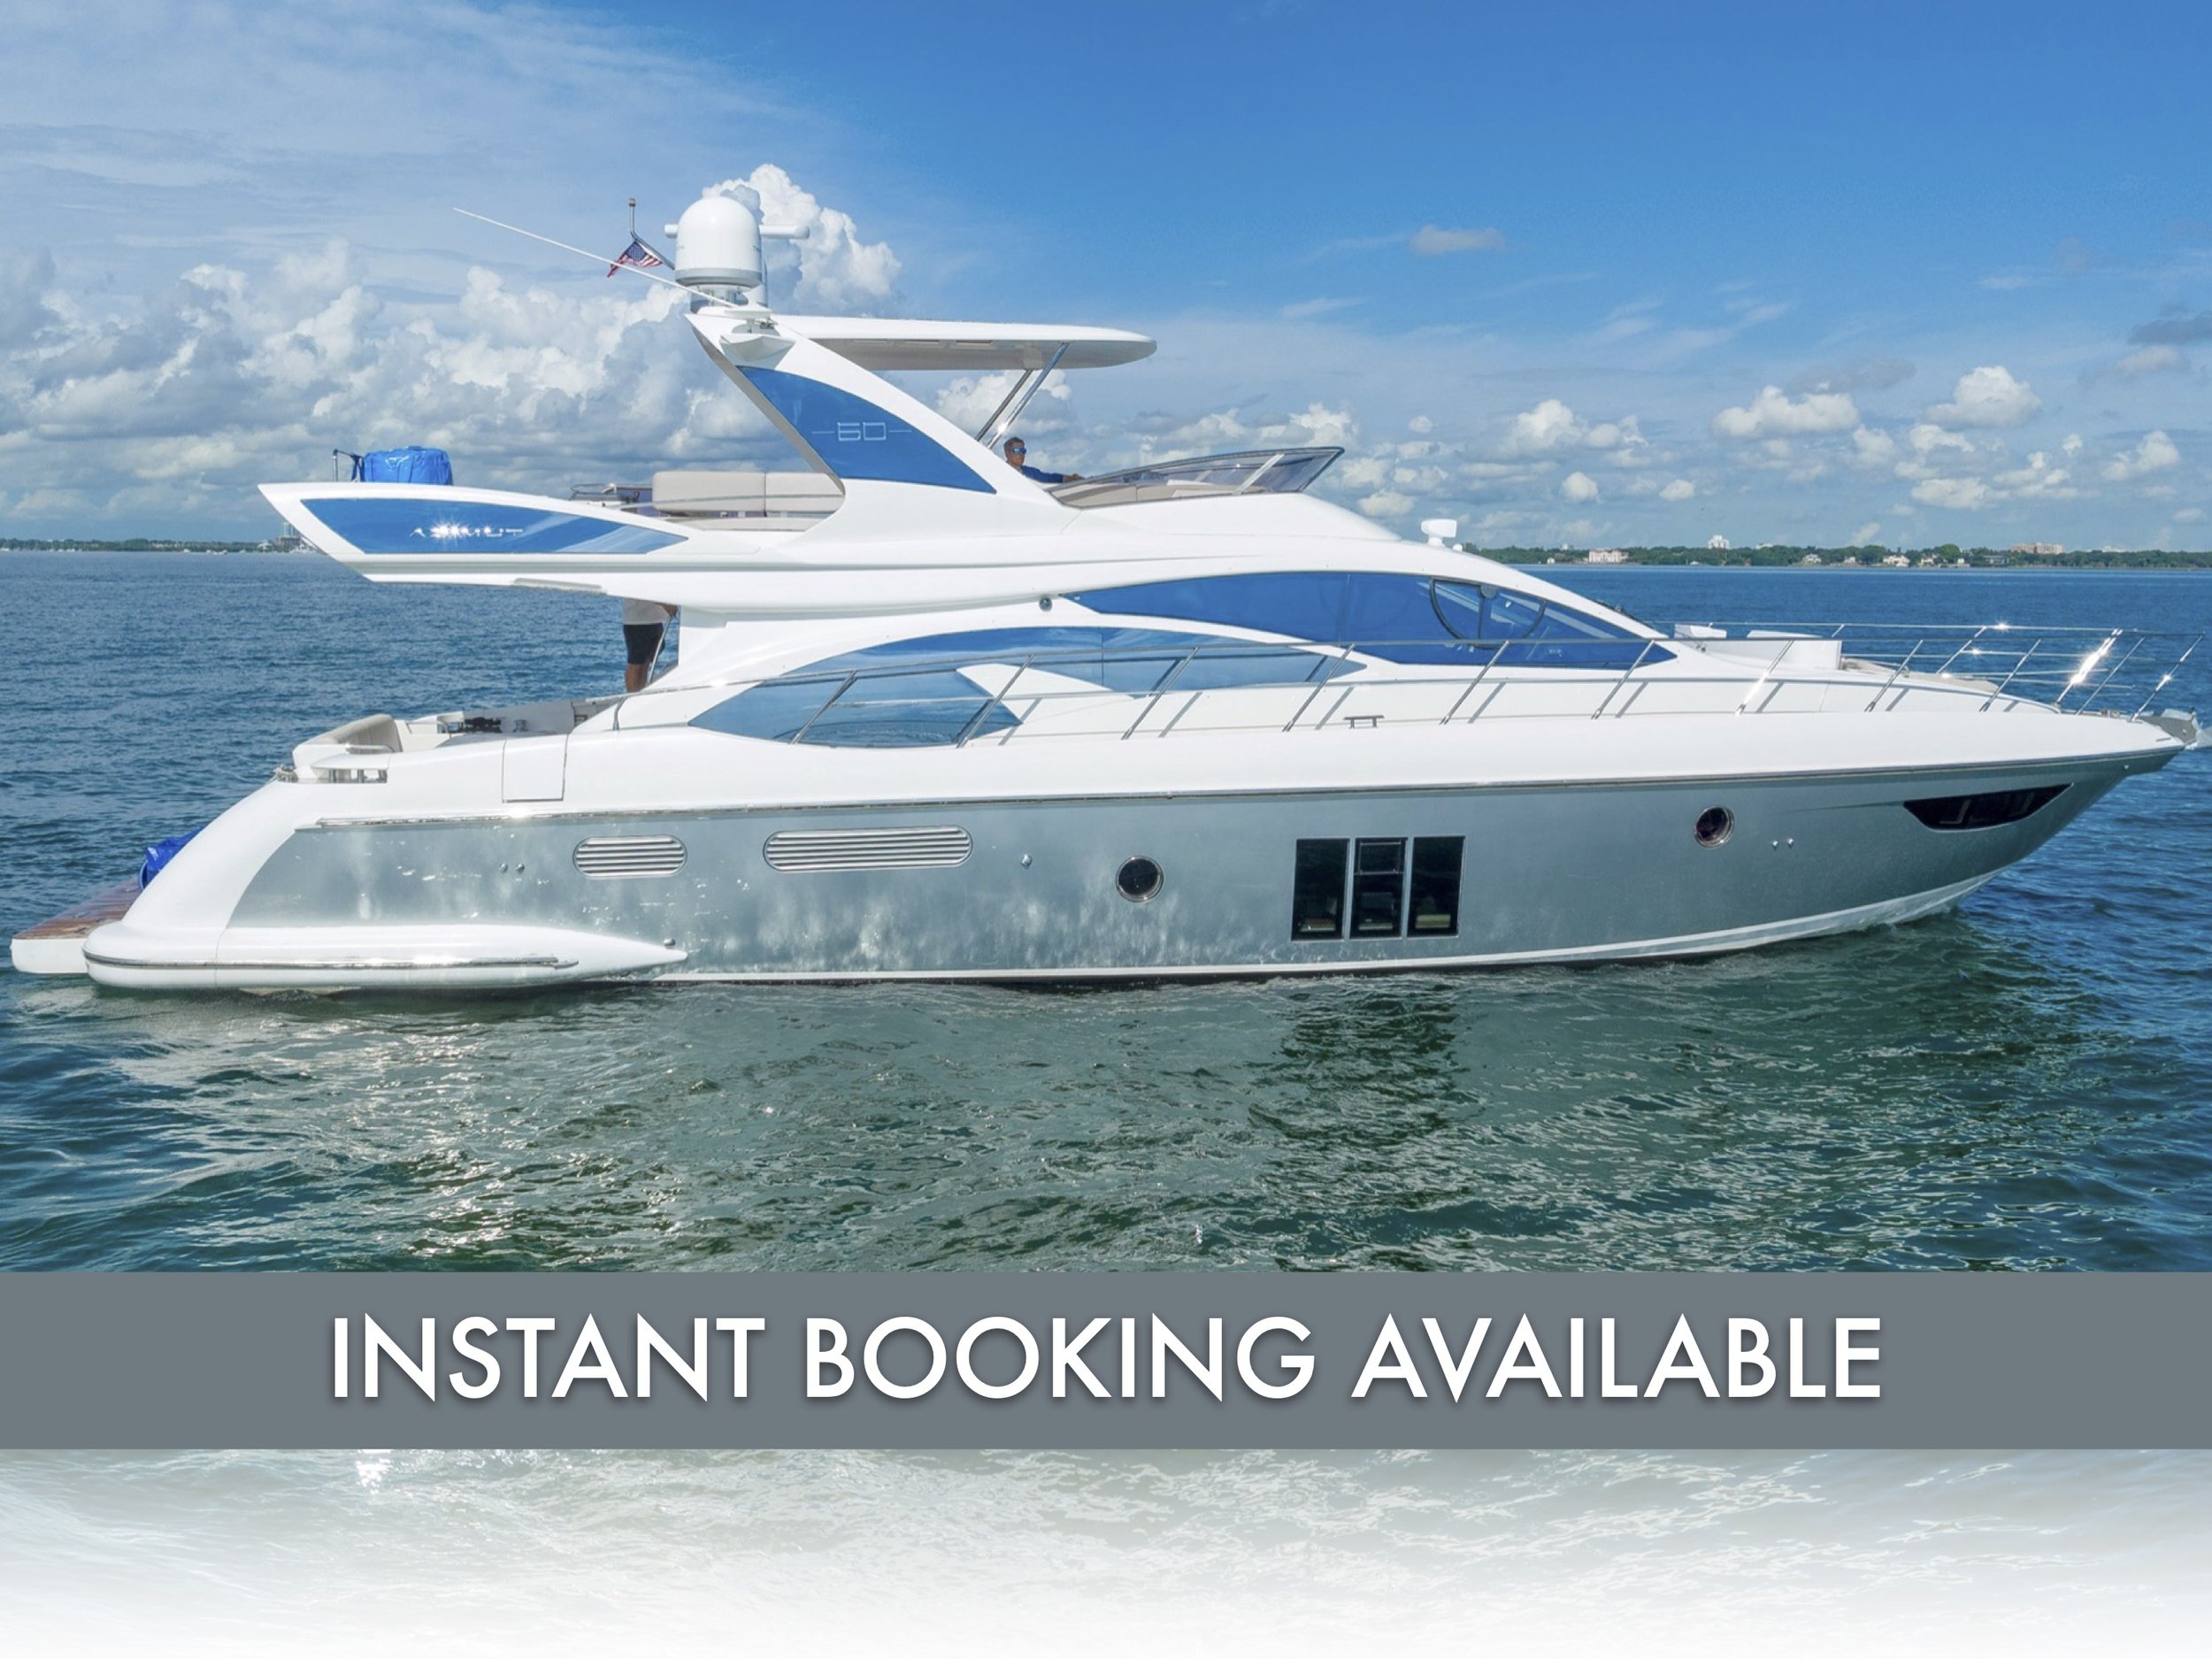 60 ft Azimut Bravo | From $2450 | 13 guest max